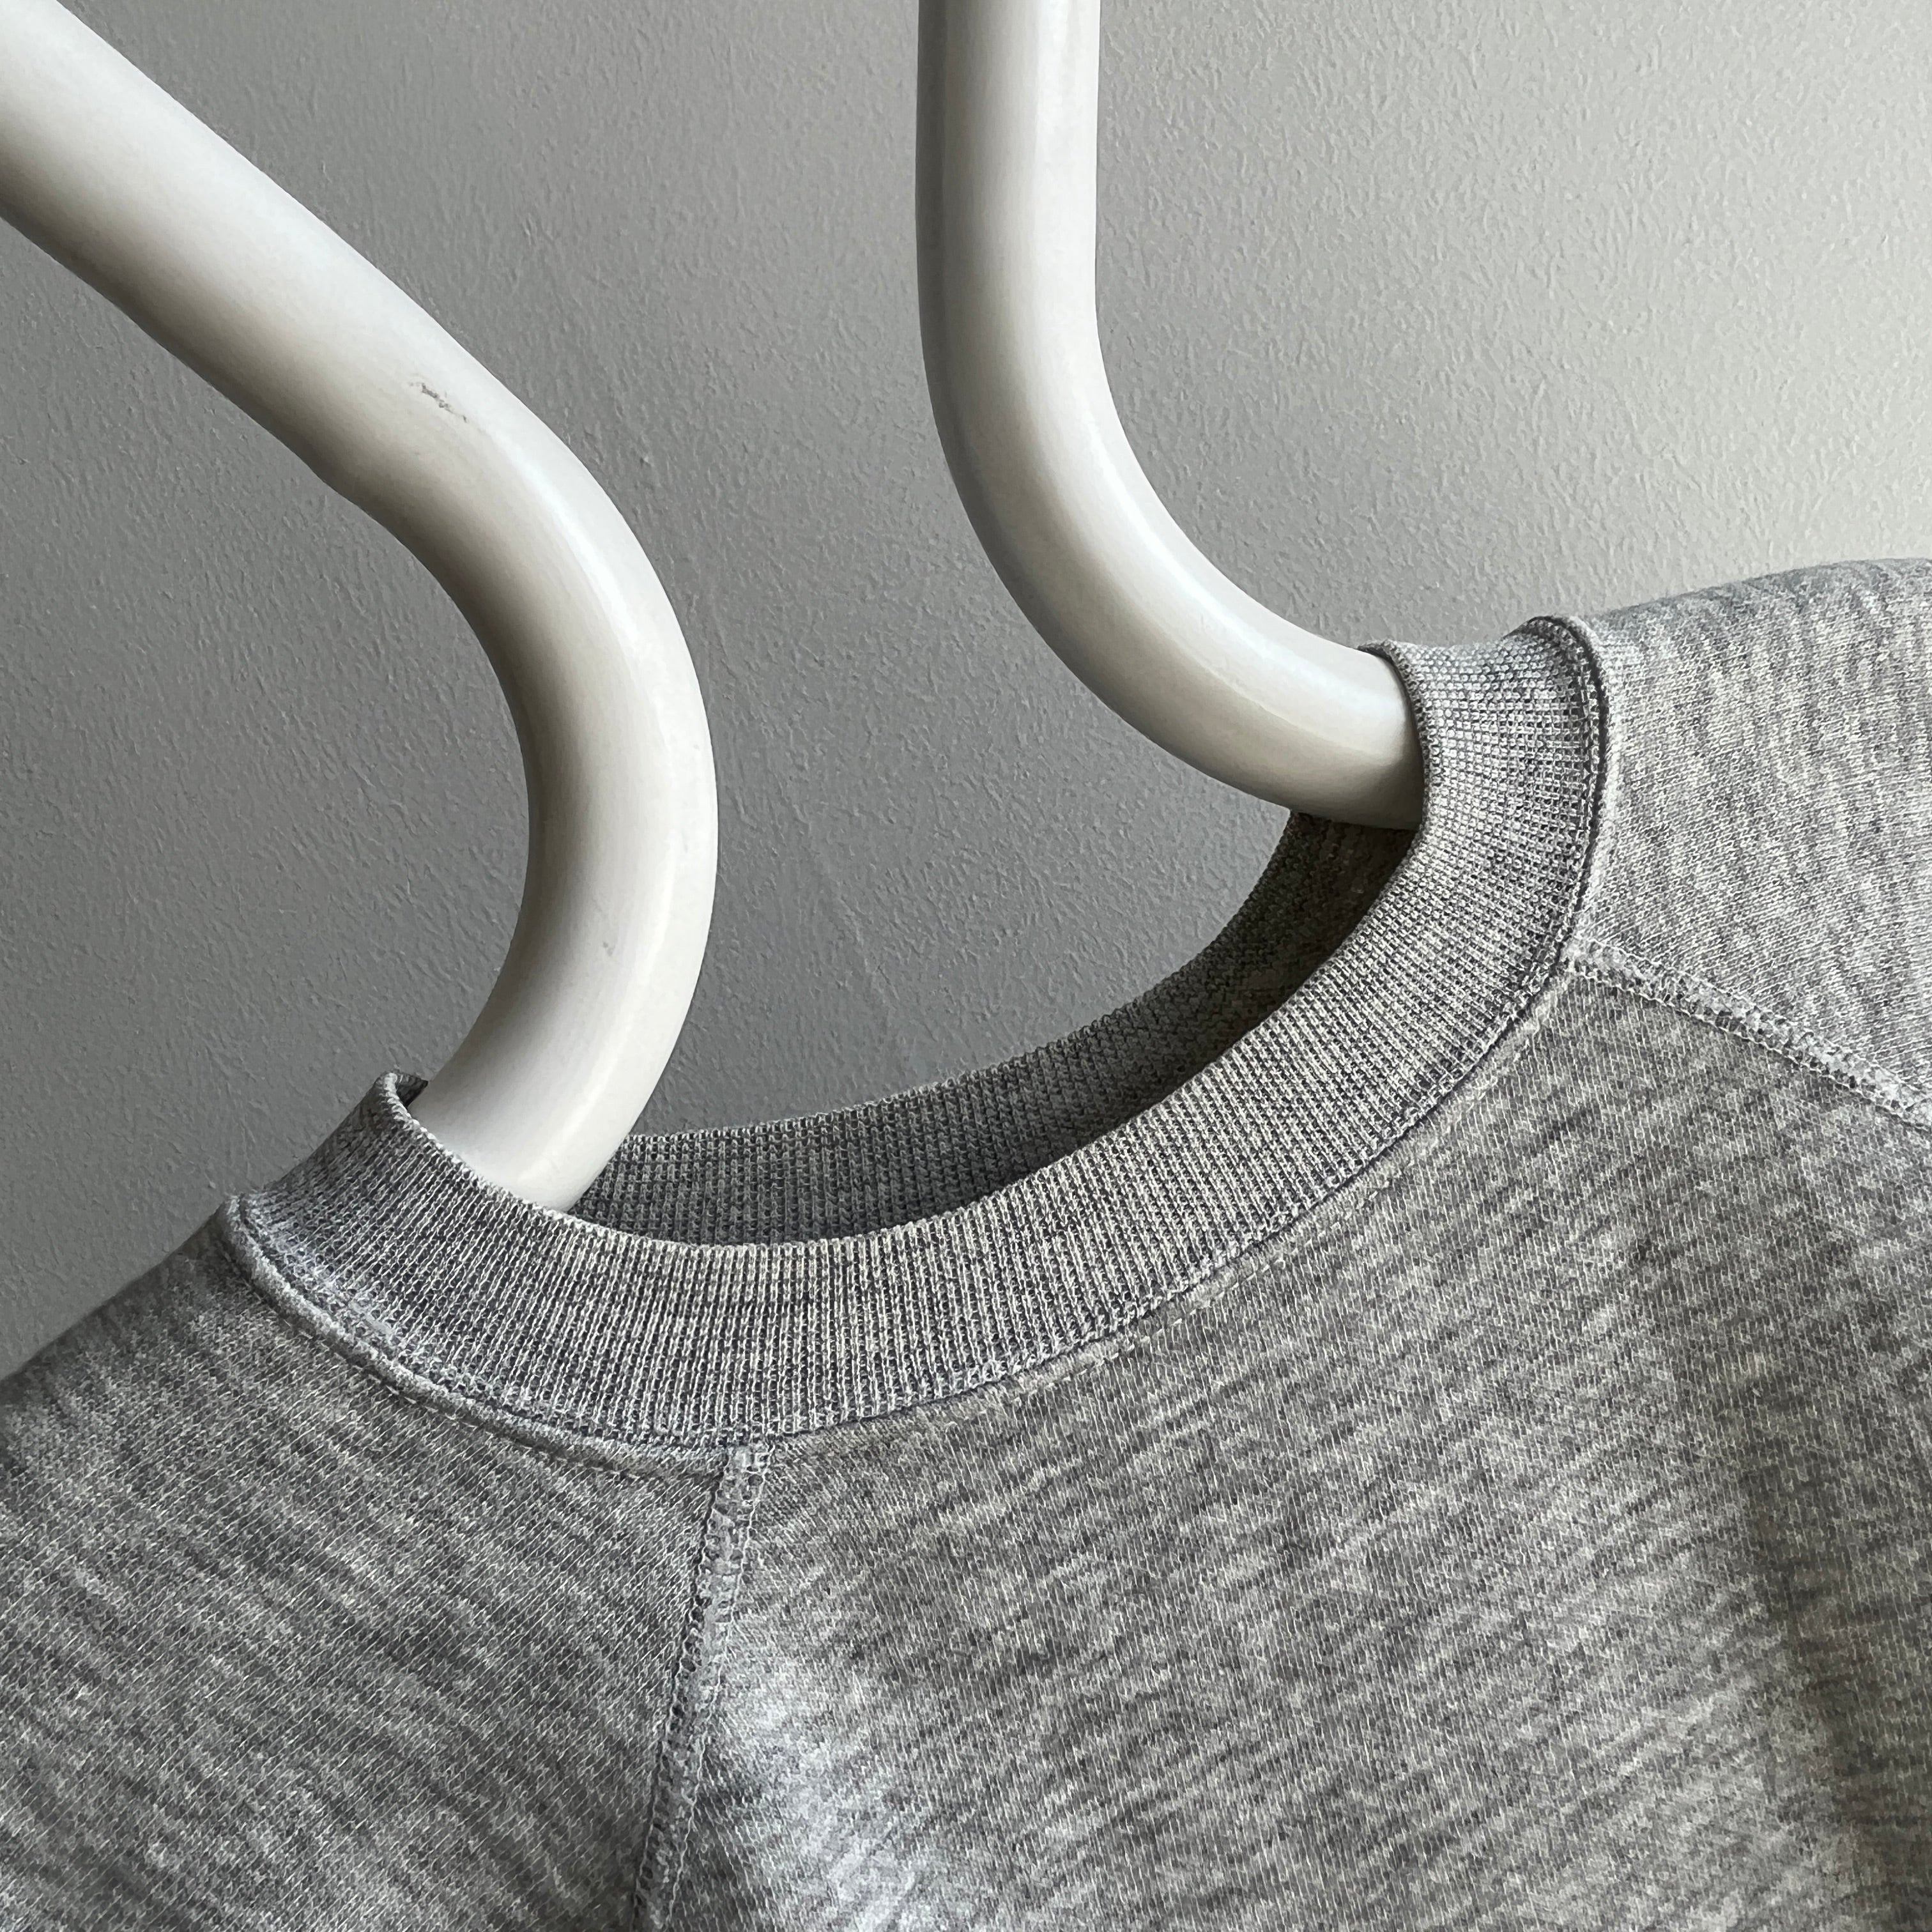 1980s Dreamy Blank Gray Sweatshirt Covered in Sleeve Stains